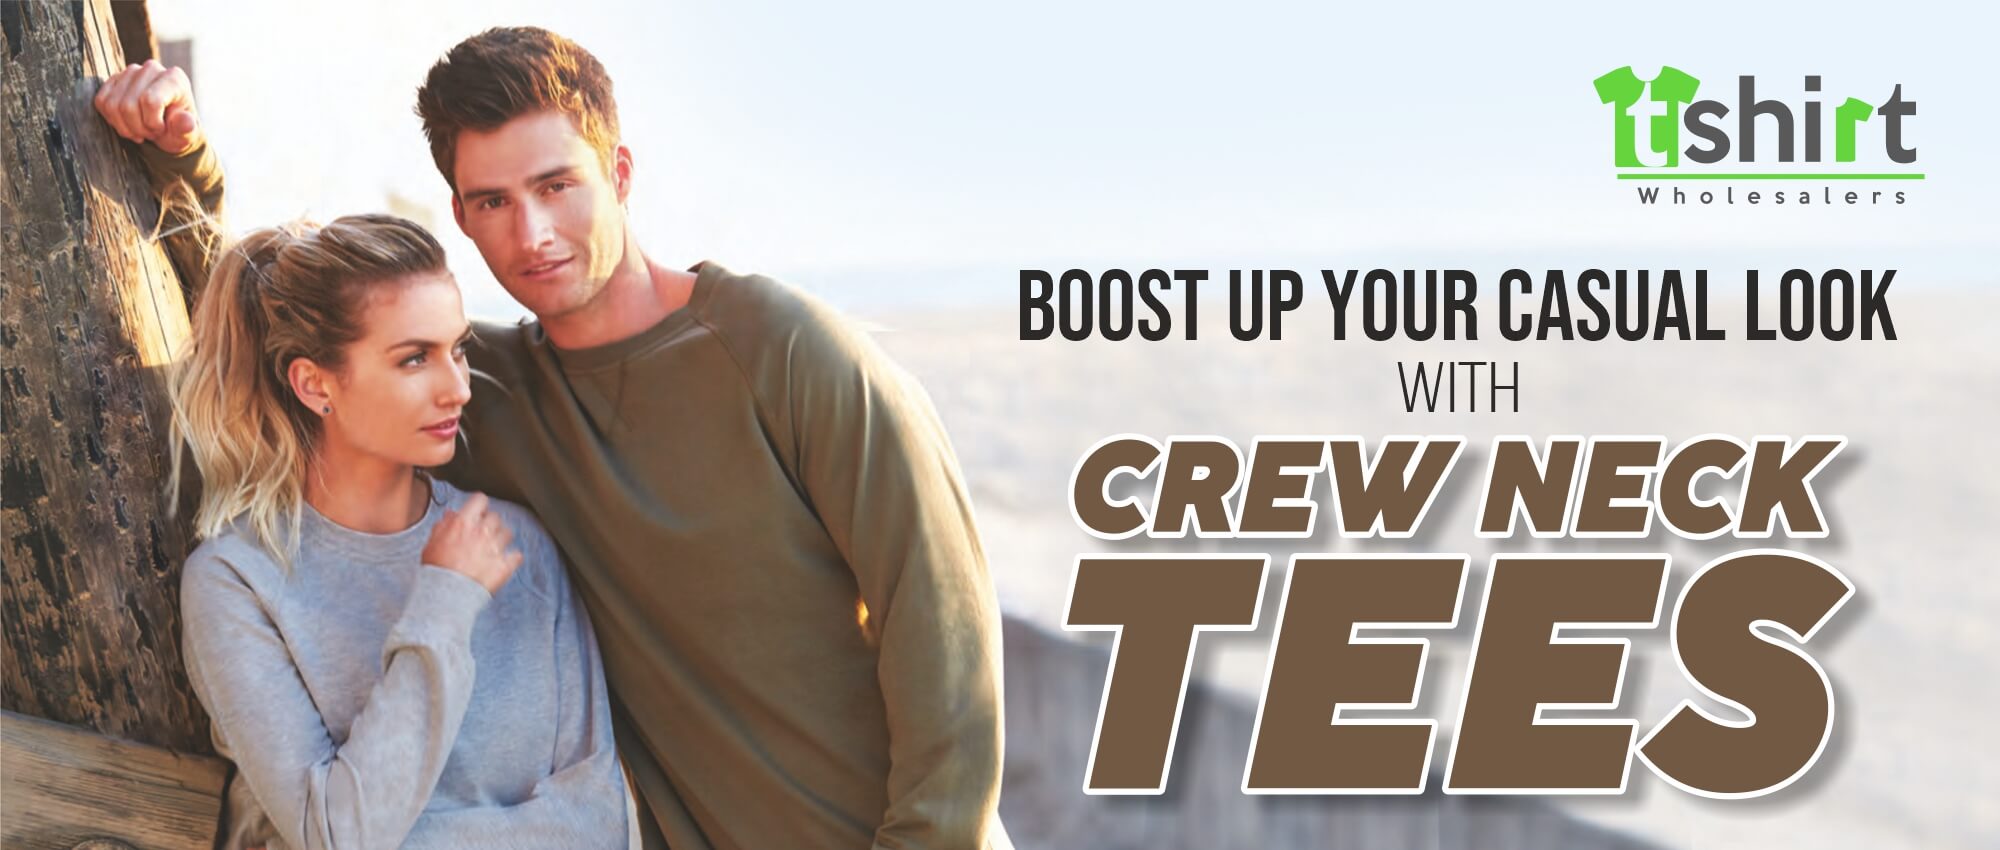 BOOST UP YOUR CASUAL LOOK WITH CREW NECK TEES